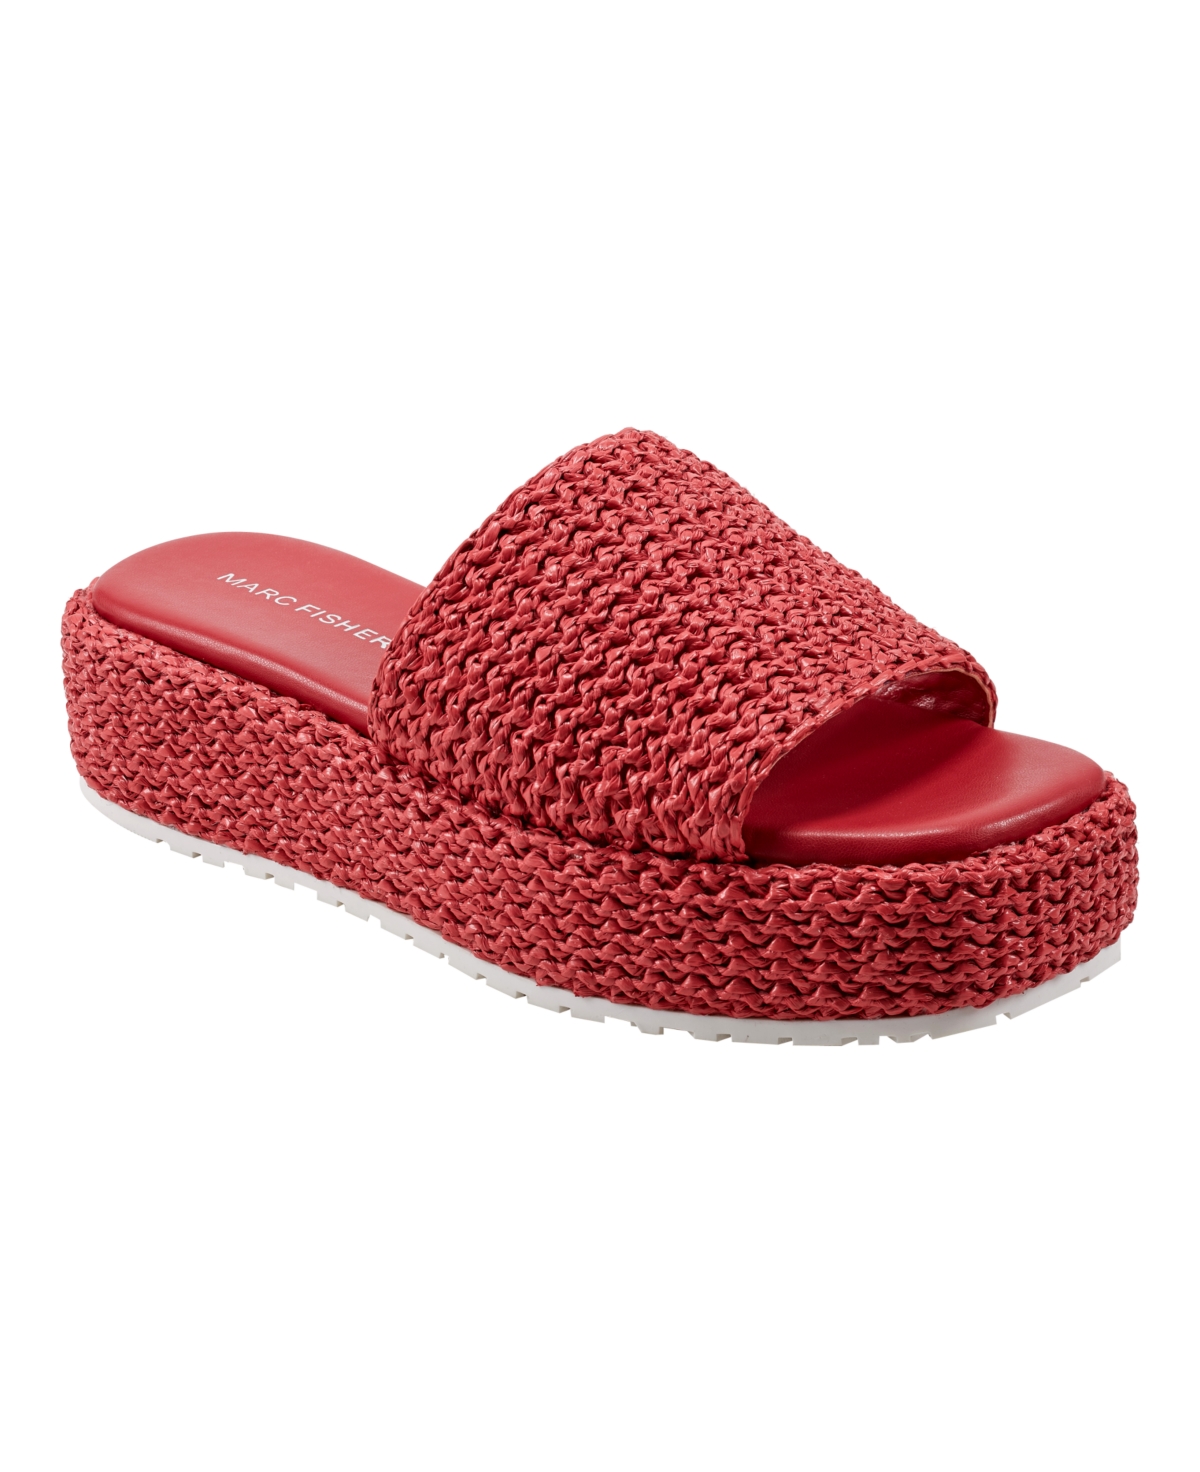 Women's Pais Slip-on Square Toe Casual Sandals - Md Red